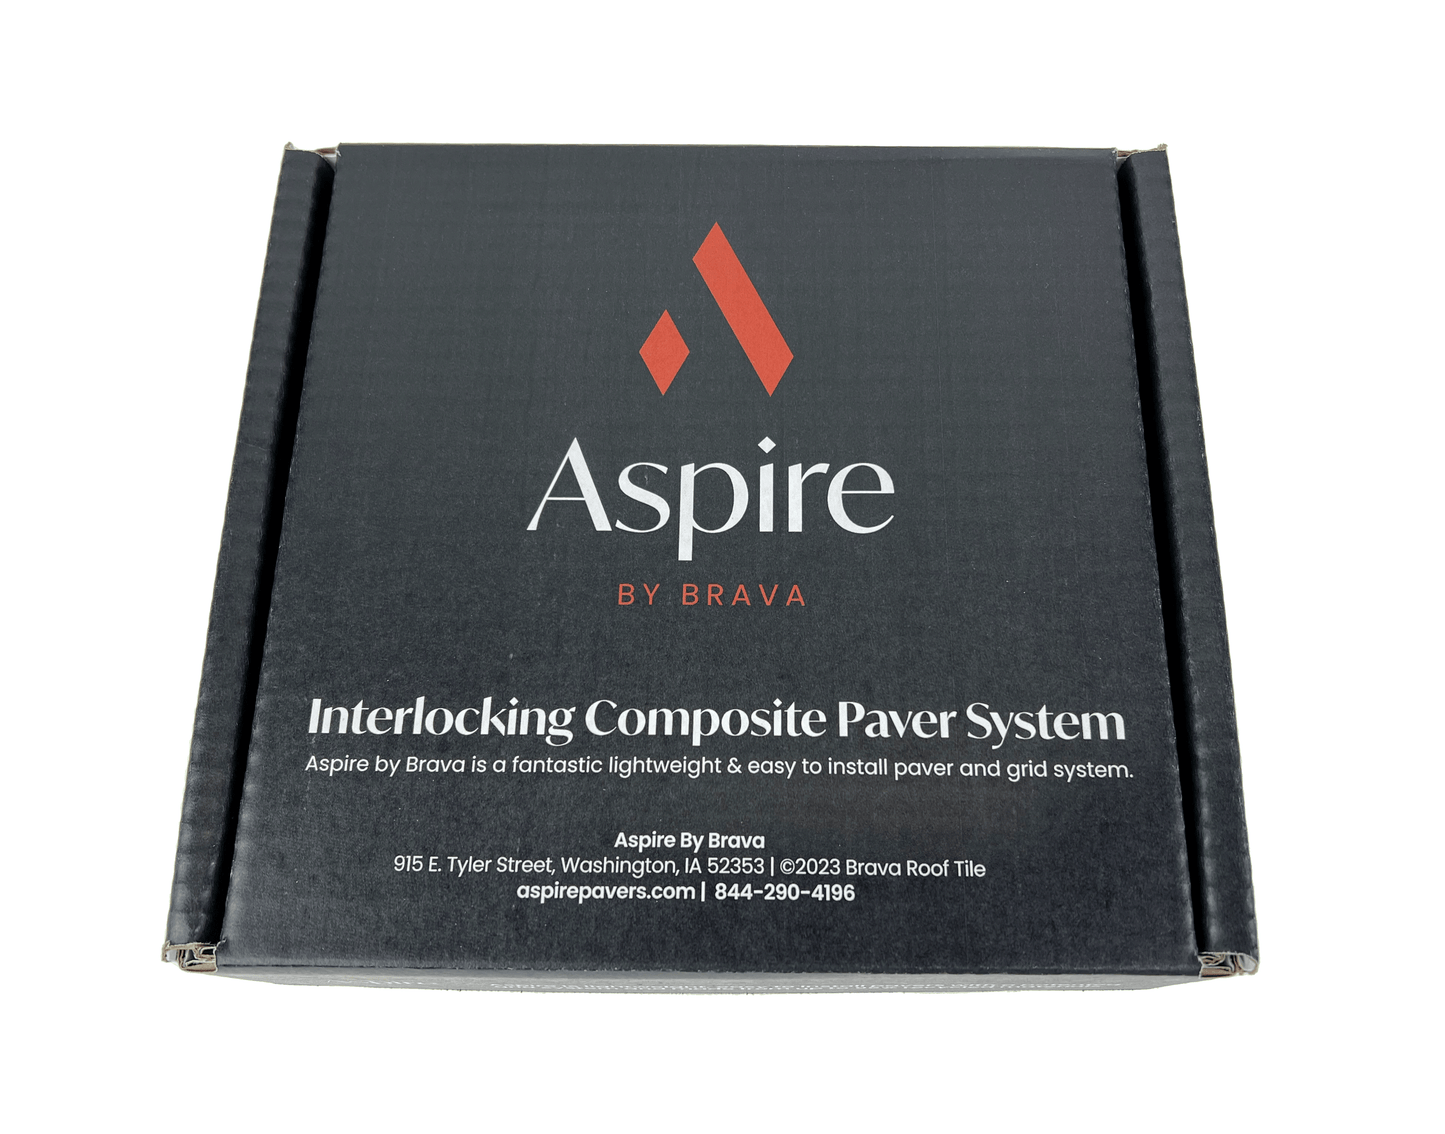 Aspire Sample Kit: One  8" x 8" grid,  Two  4" x 4" pavers, One 4" x 8" paver, Brochure, Color Card - Boardwalk, Redwood, and Waterwheel Colors - Free Shipping